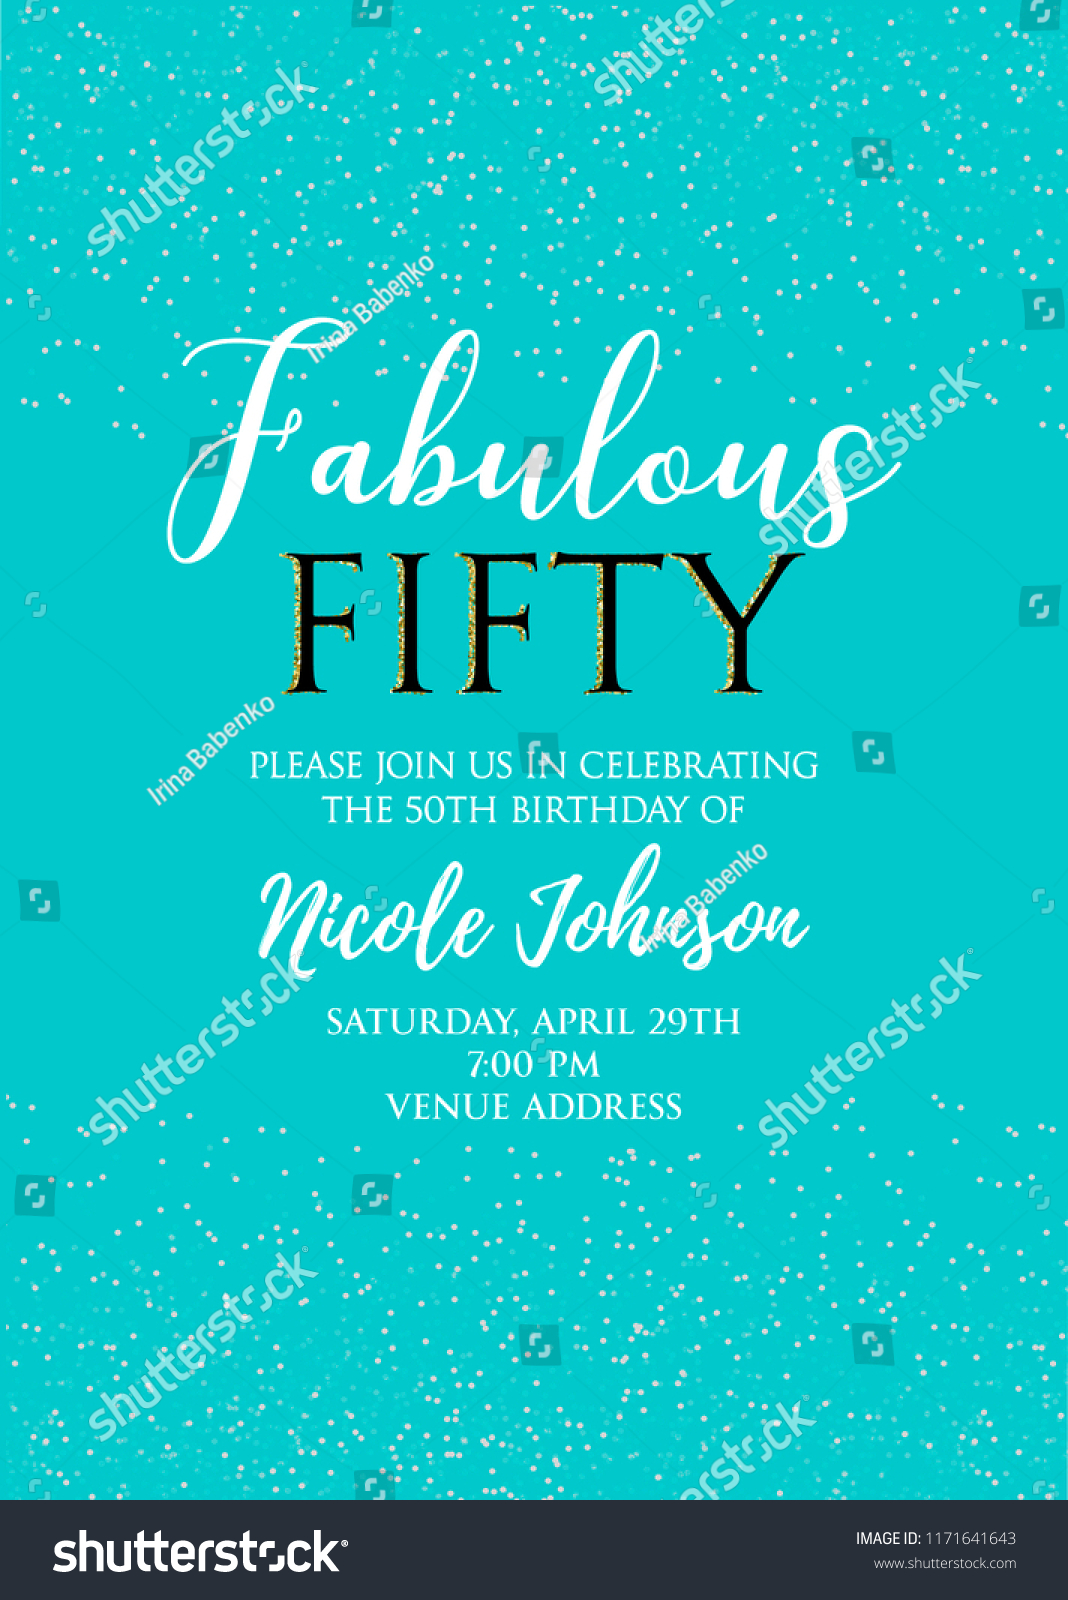 SVG of Fabulous Fifty birthday party vector printable invitation card with golden glitter elements. svg